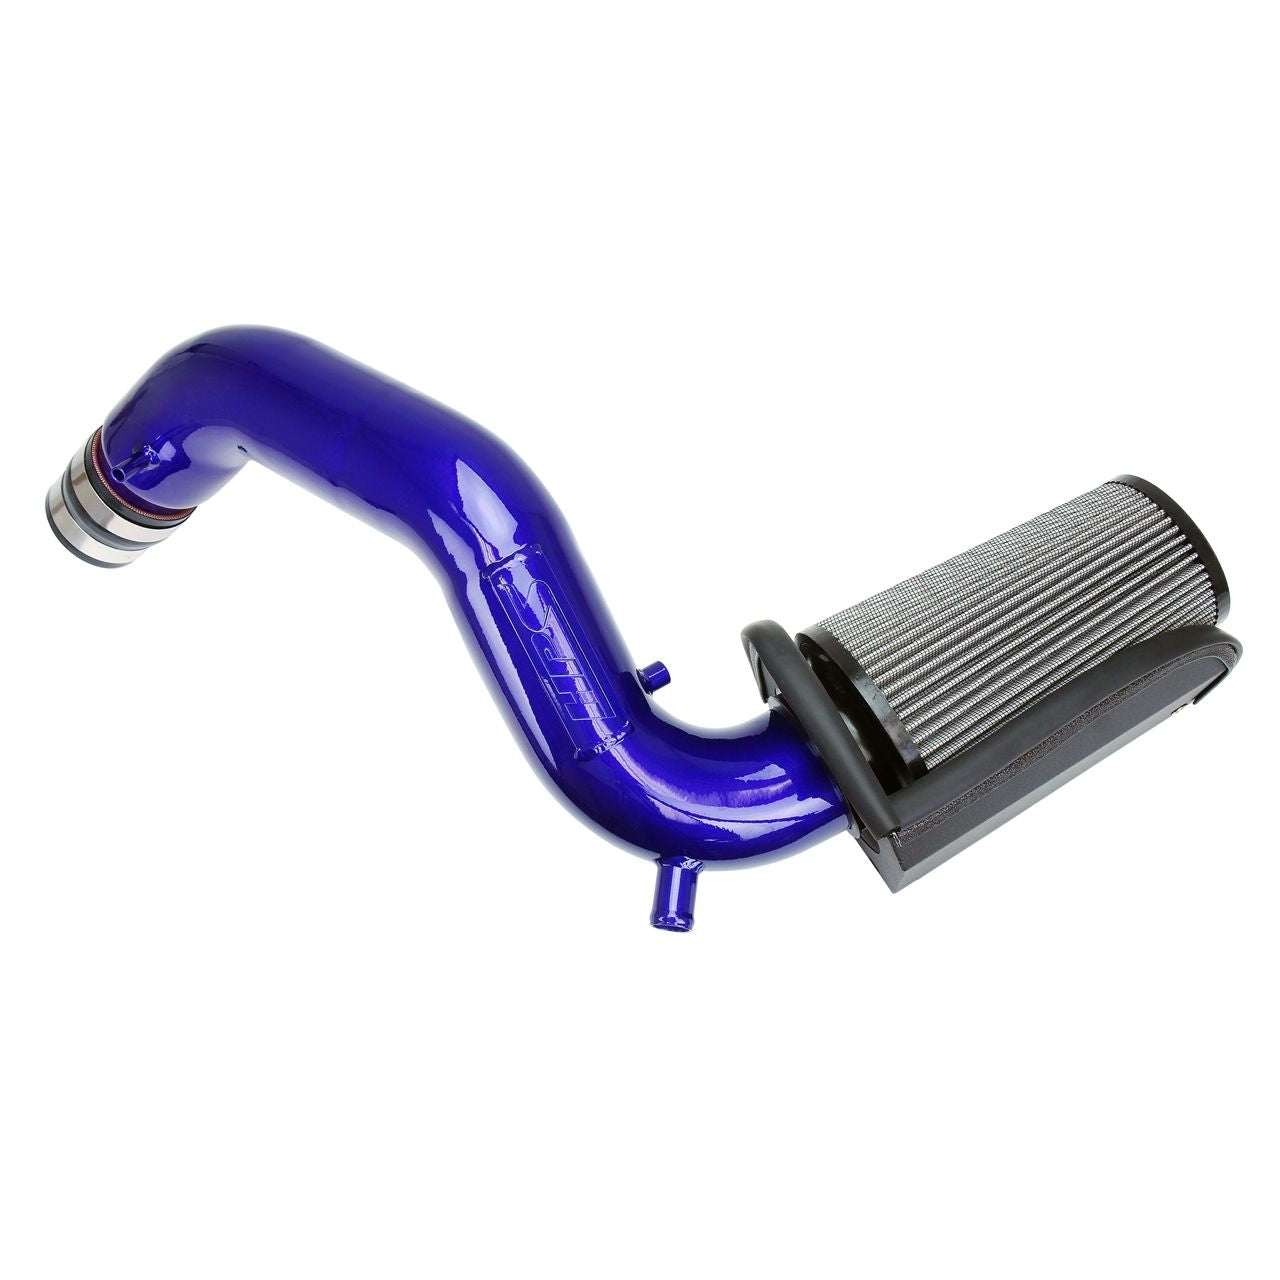 HPS Cold Air Intake Kit 19-21 Hyundai Veloster 1.6L Turbo, Includes Heat Shield, Blue